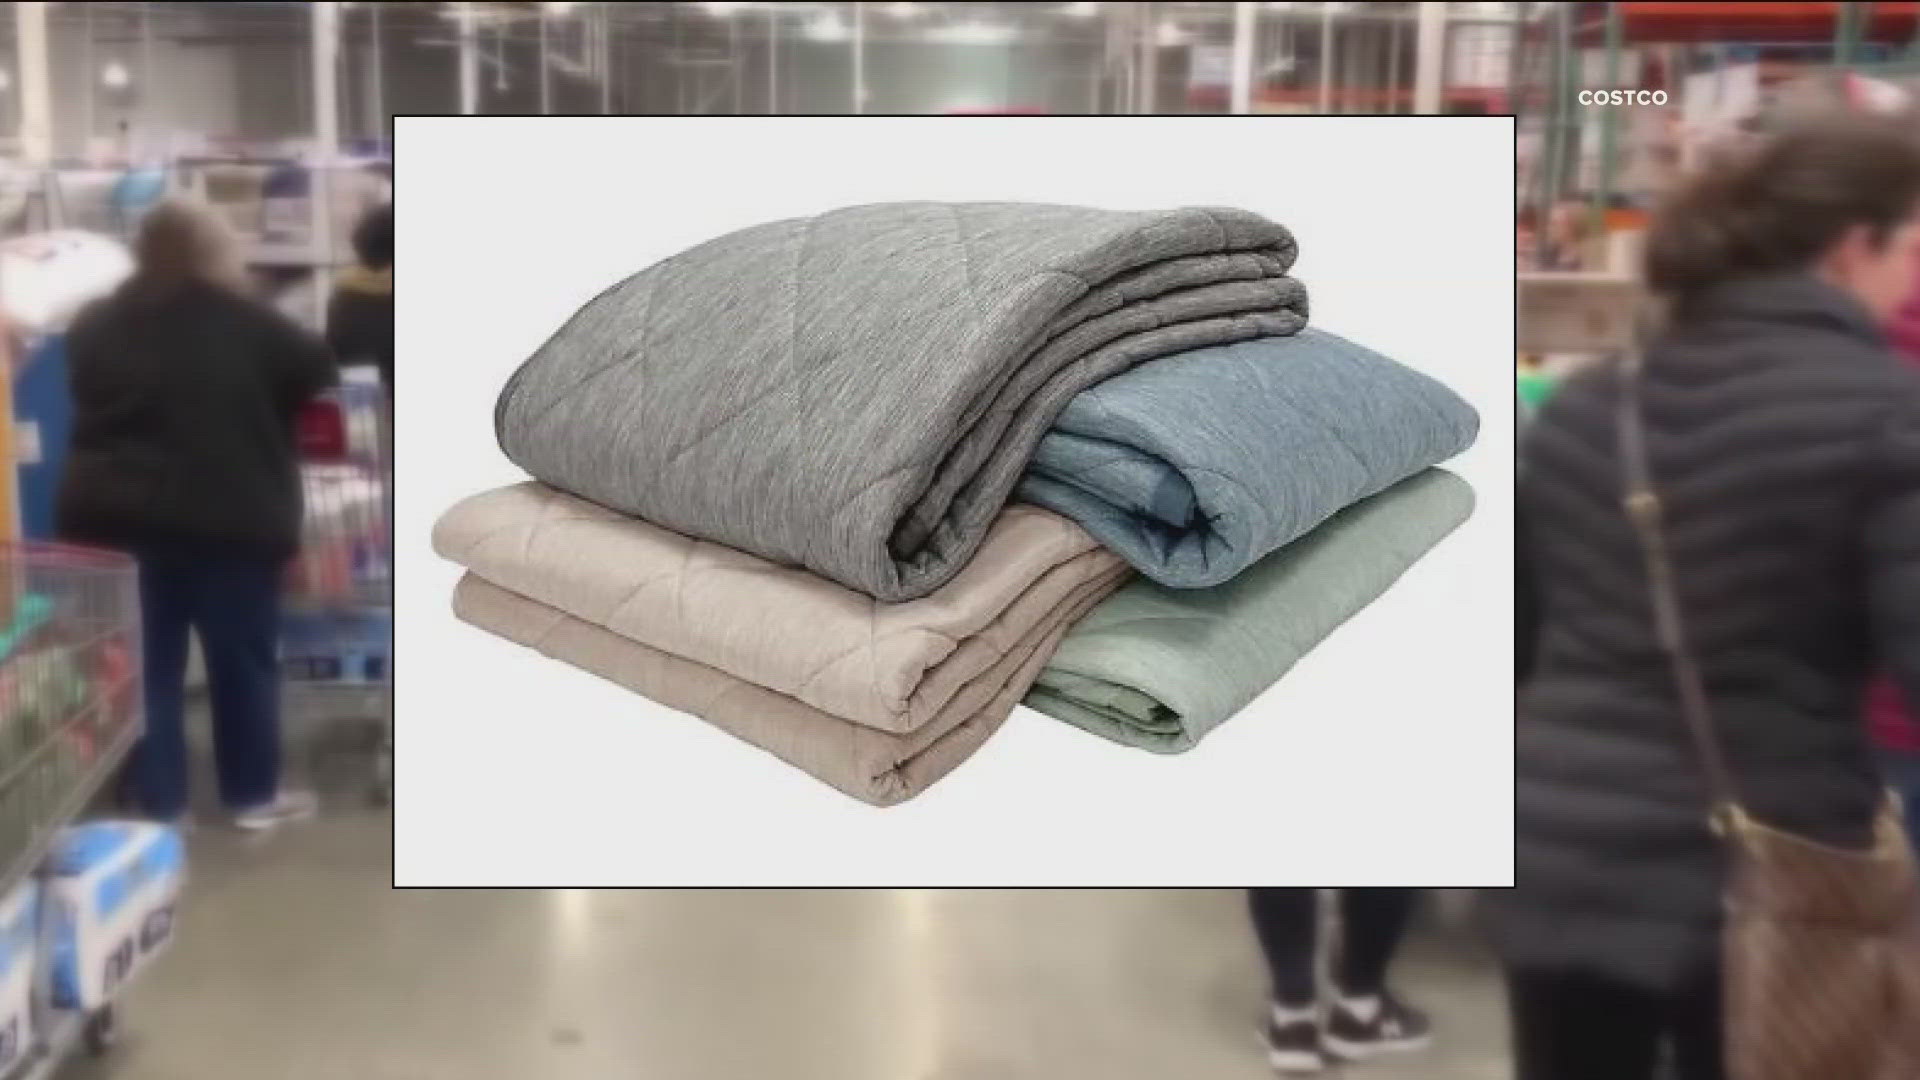 New data shows a cooling blanket is the most popular item at Costco for Minnesotans.